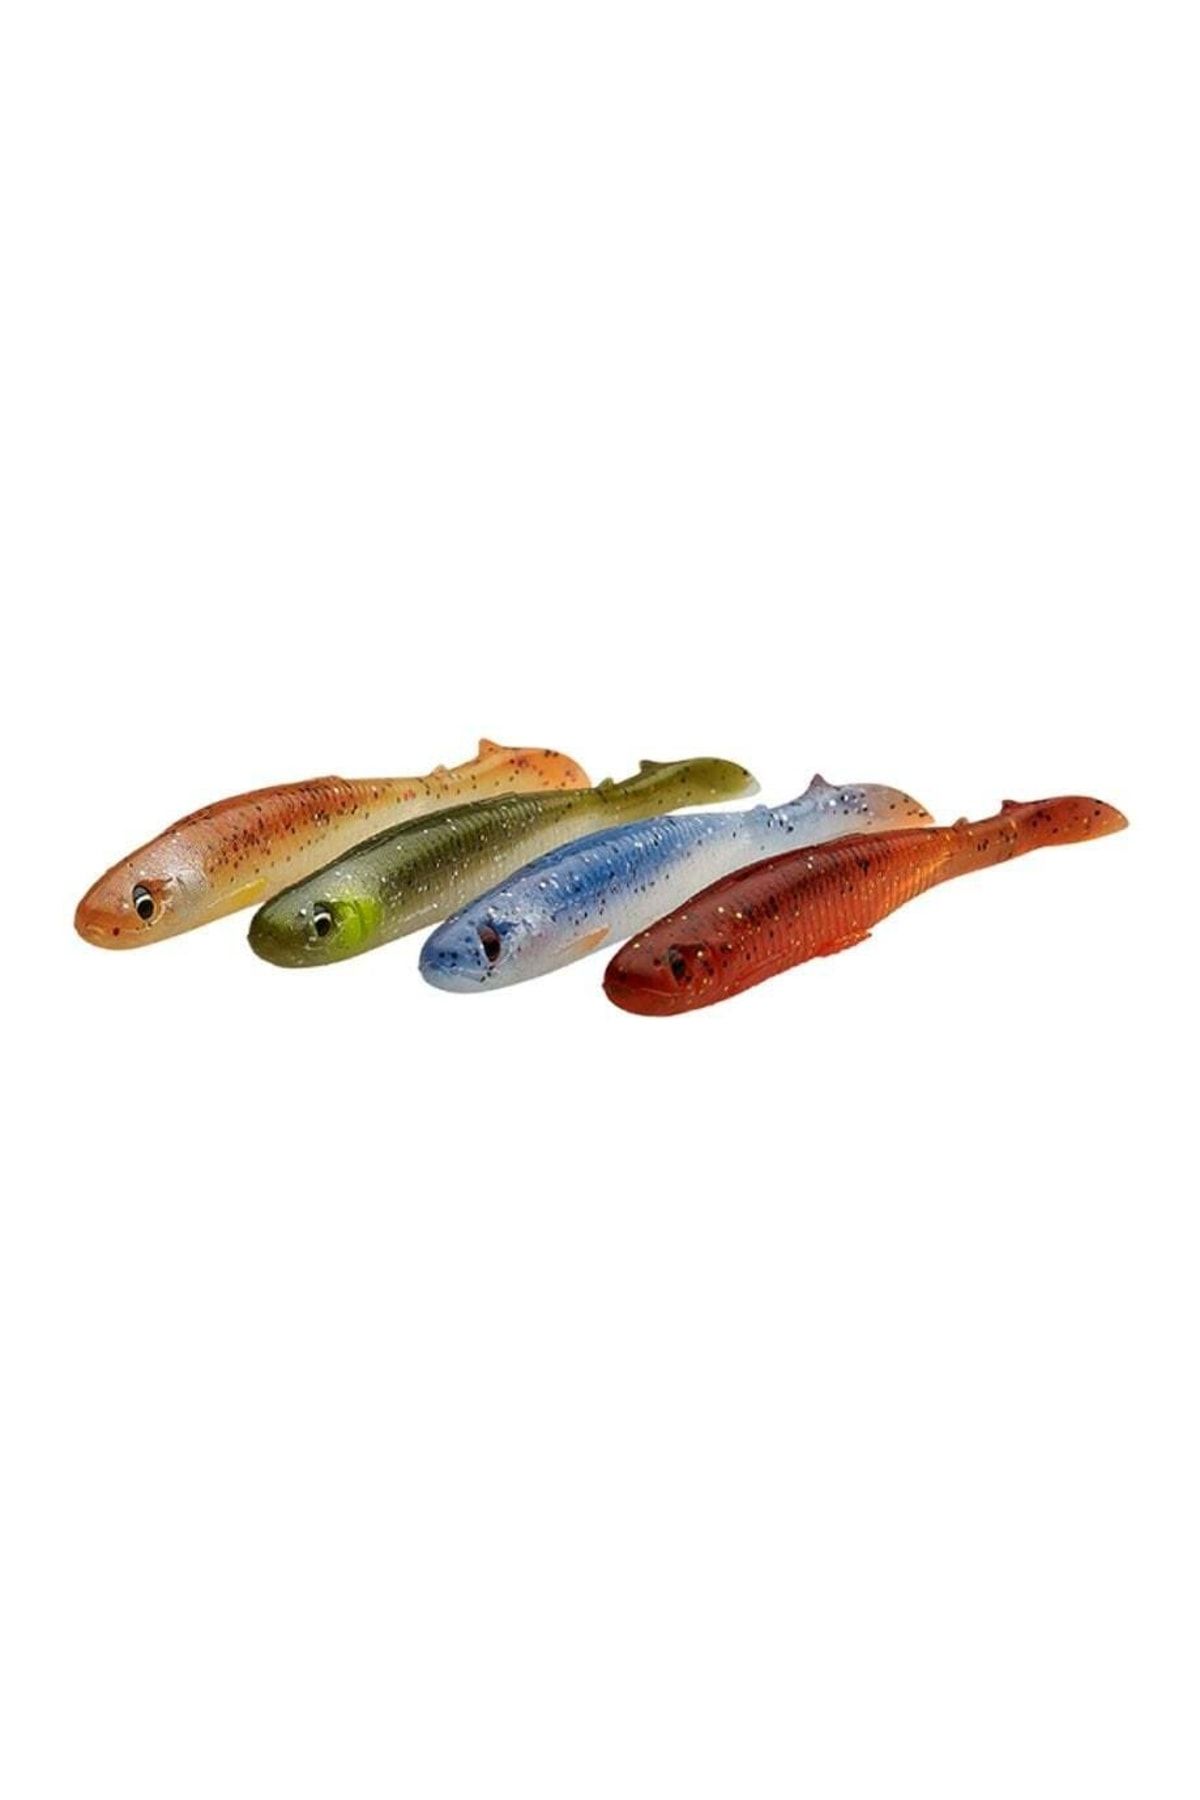 Savage Gear Slender Scoop Shad 9 Cm 4 Gr Clear Water Mix